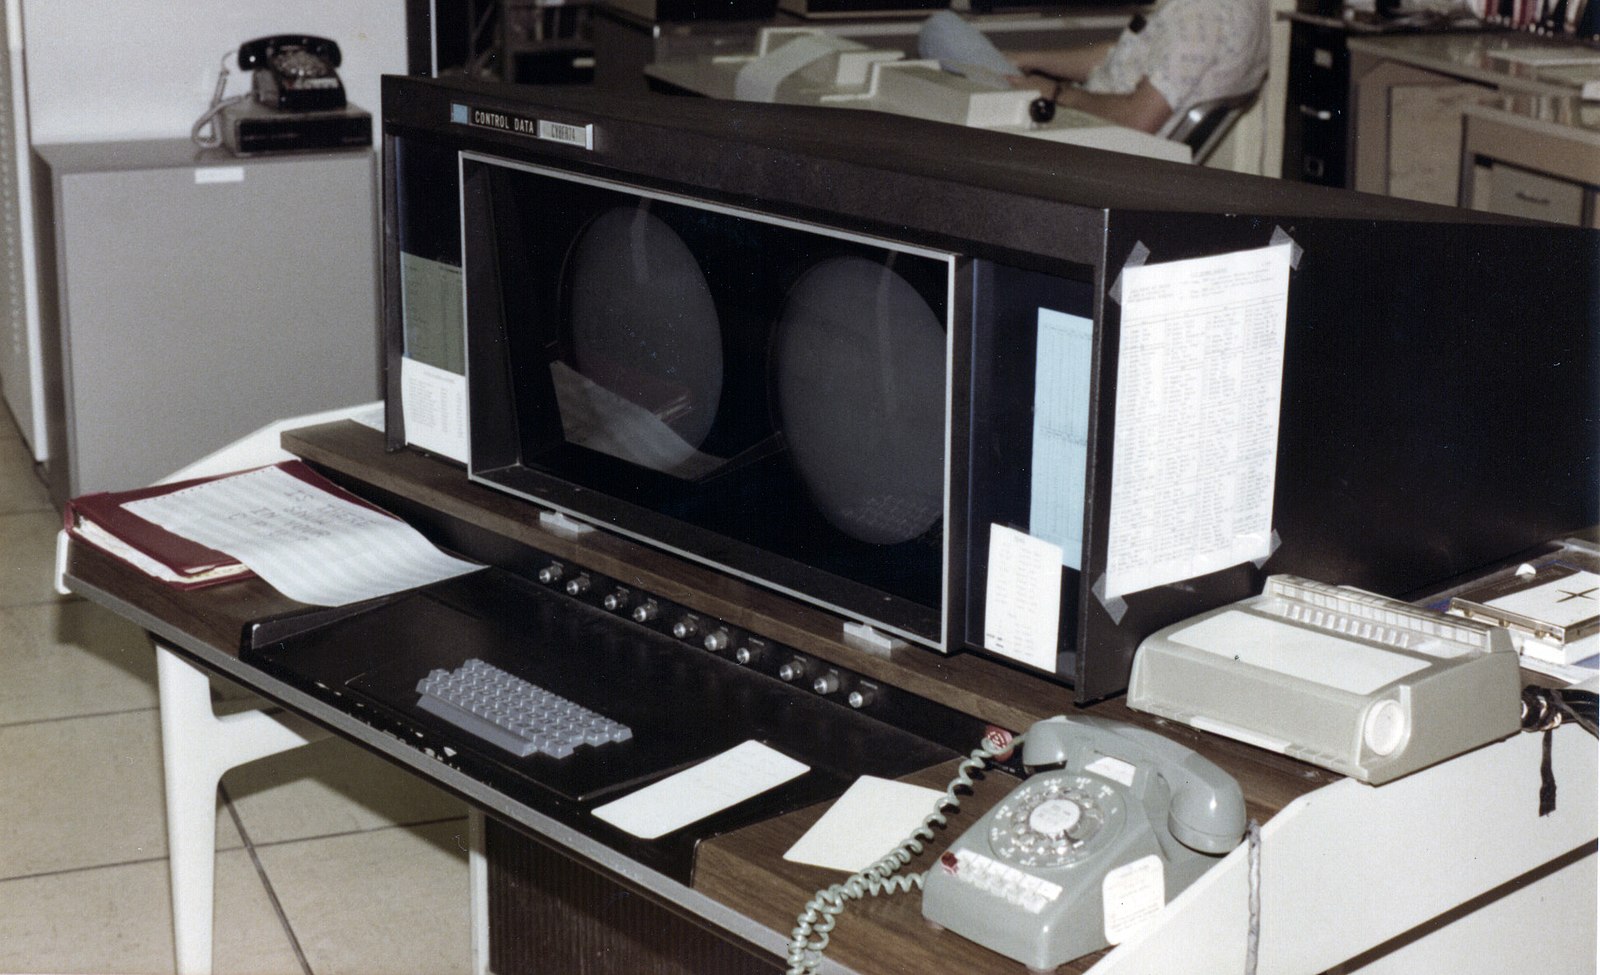 CDC Cyber 70/74 control console at the University of Georgia